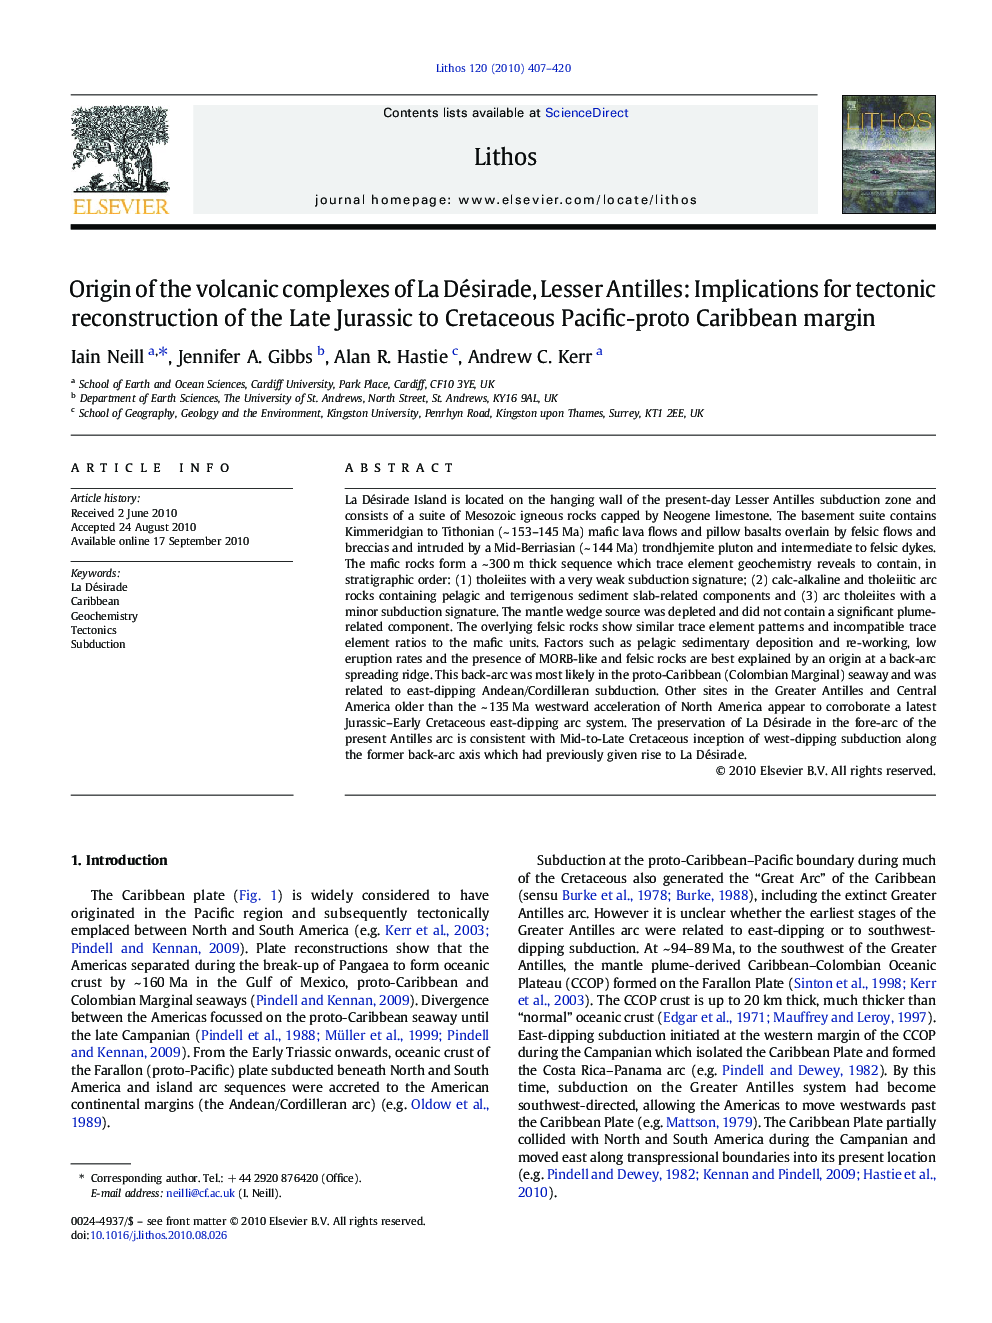 Origin of the volcanic complexes of La Désirade, Lesser Antilles: Implications for tectonic reconstruction of the Late Jurassic to Cretaceous Pacific-proto Caribbean margin